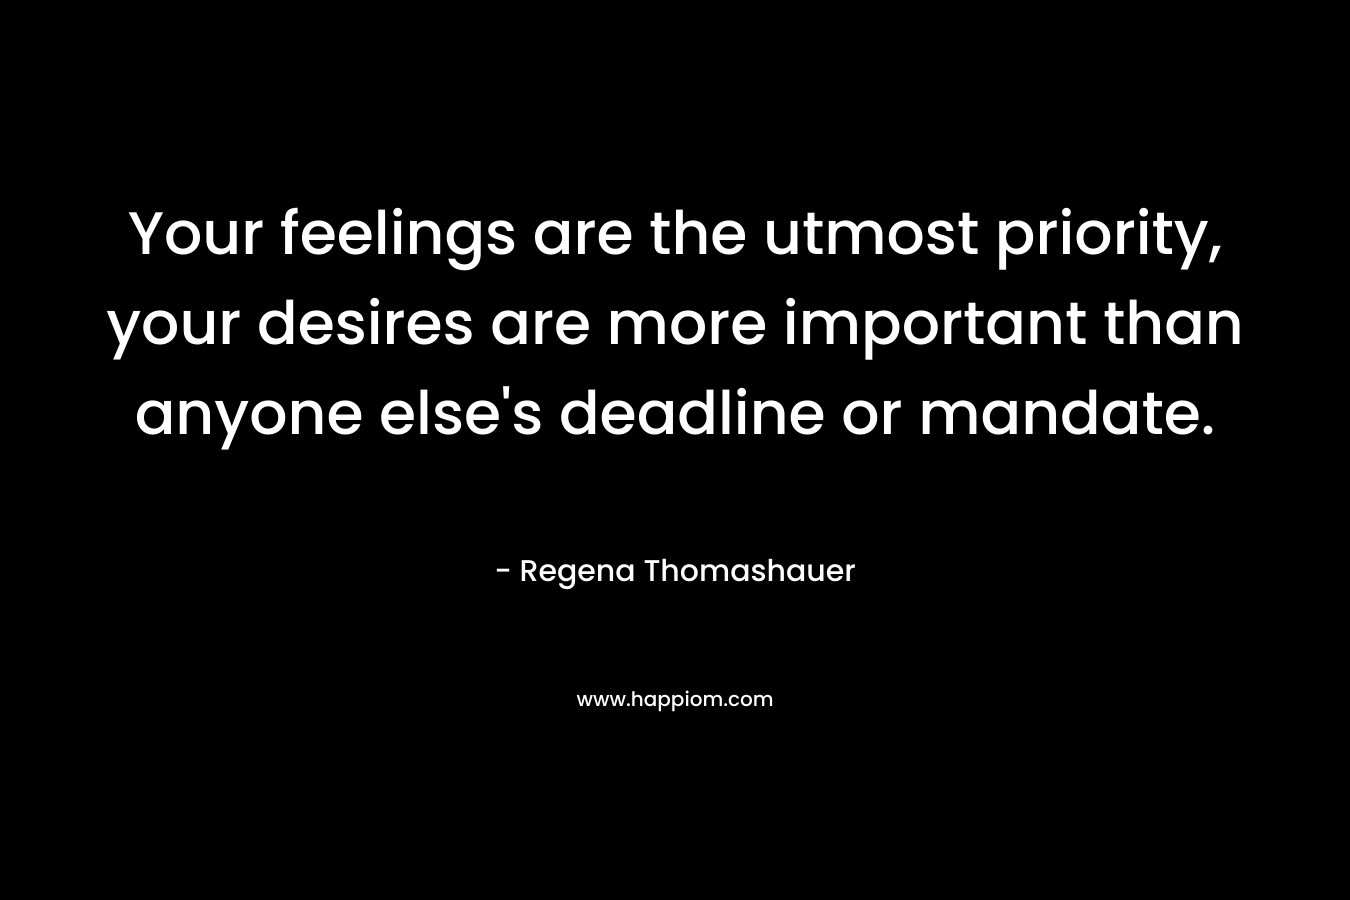 Your feelings are the utmost priority, your desires are more important than anyone else’s deadline or mandate. – Regena Thomashauer